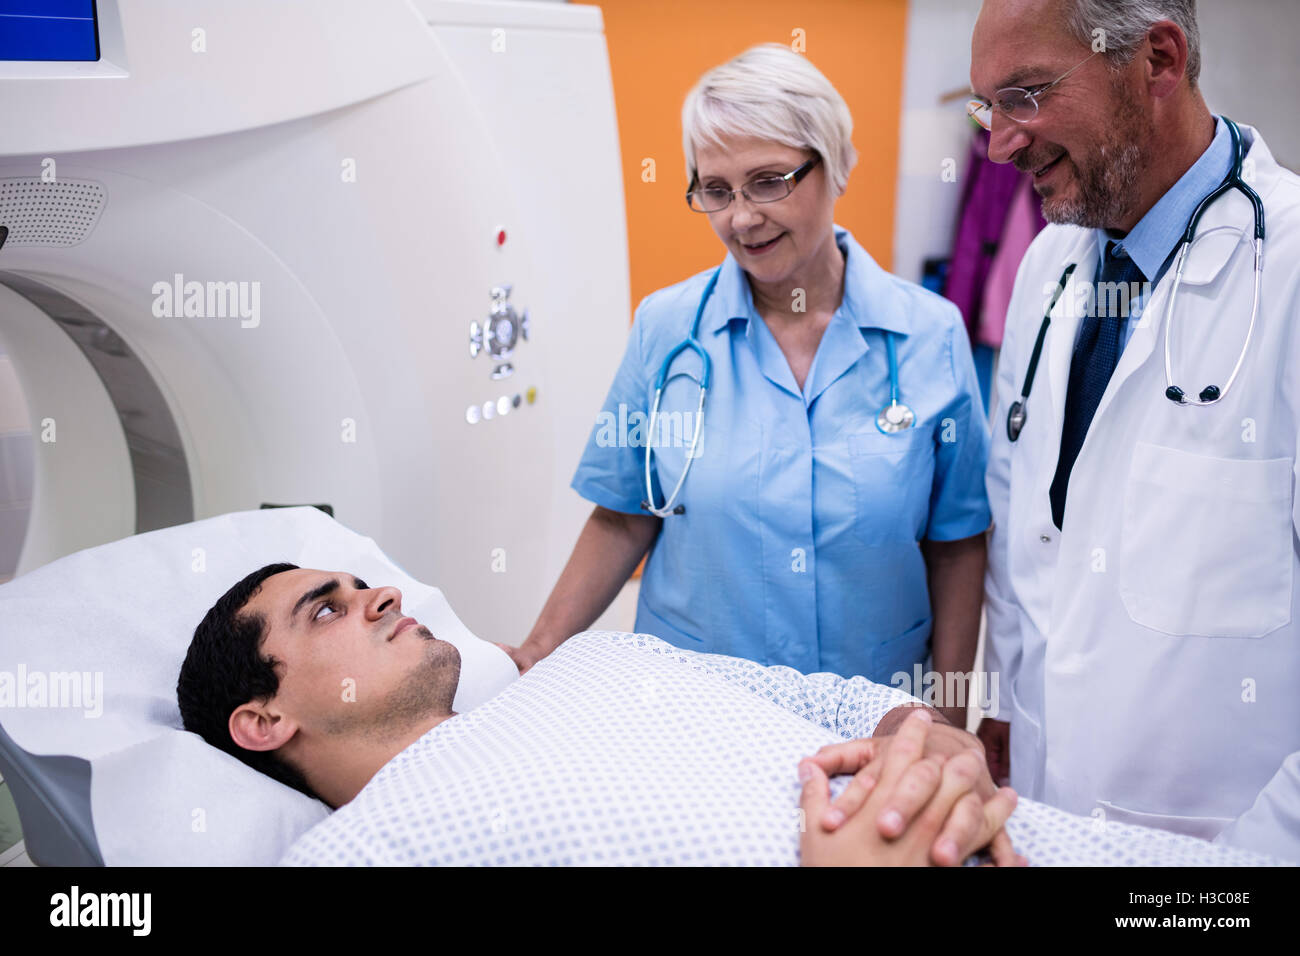 Doctors interacting with patient in scanning room Stock Photo